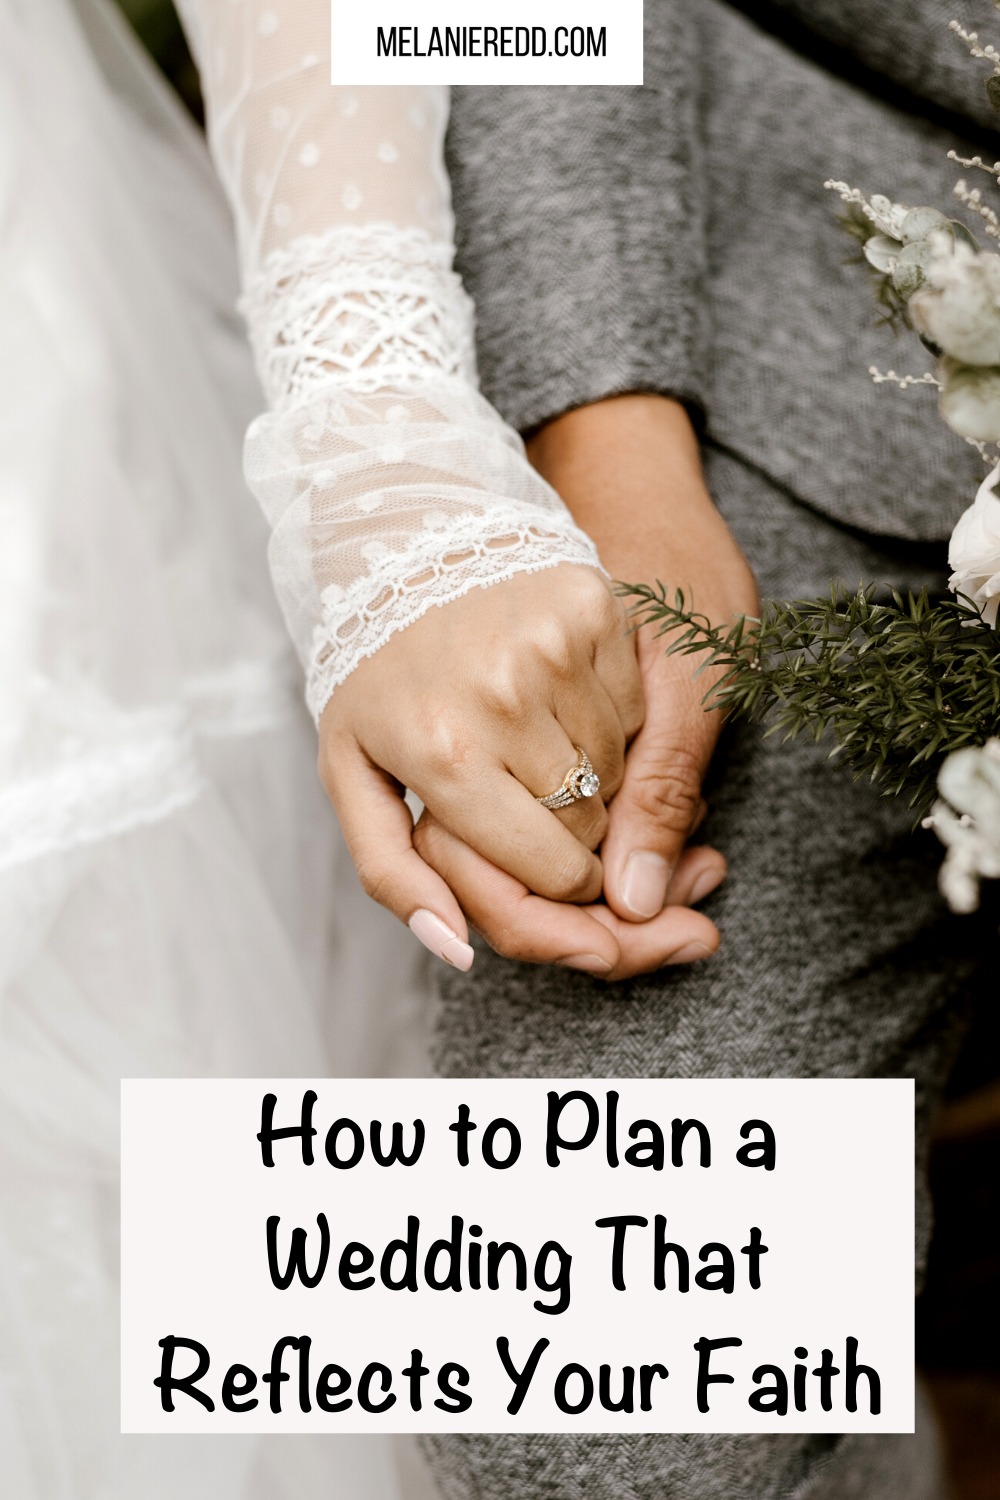 As you plan a wedding and consider all that you want to include, take a few moments to think about how to plan a wedding that reflects your faith.